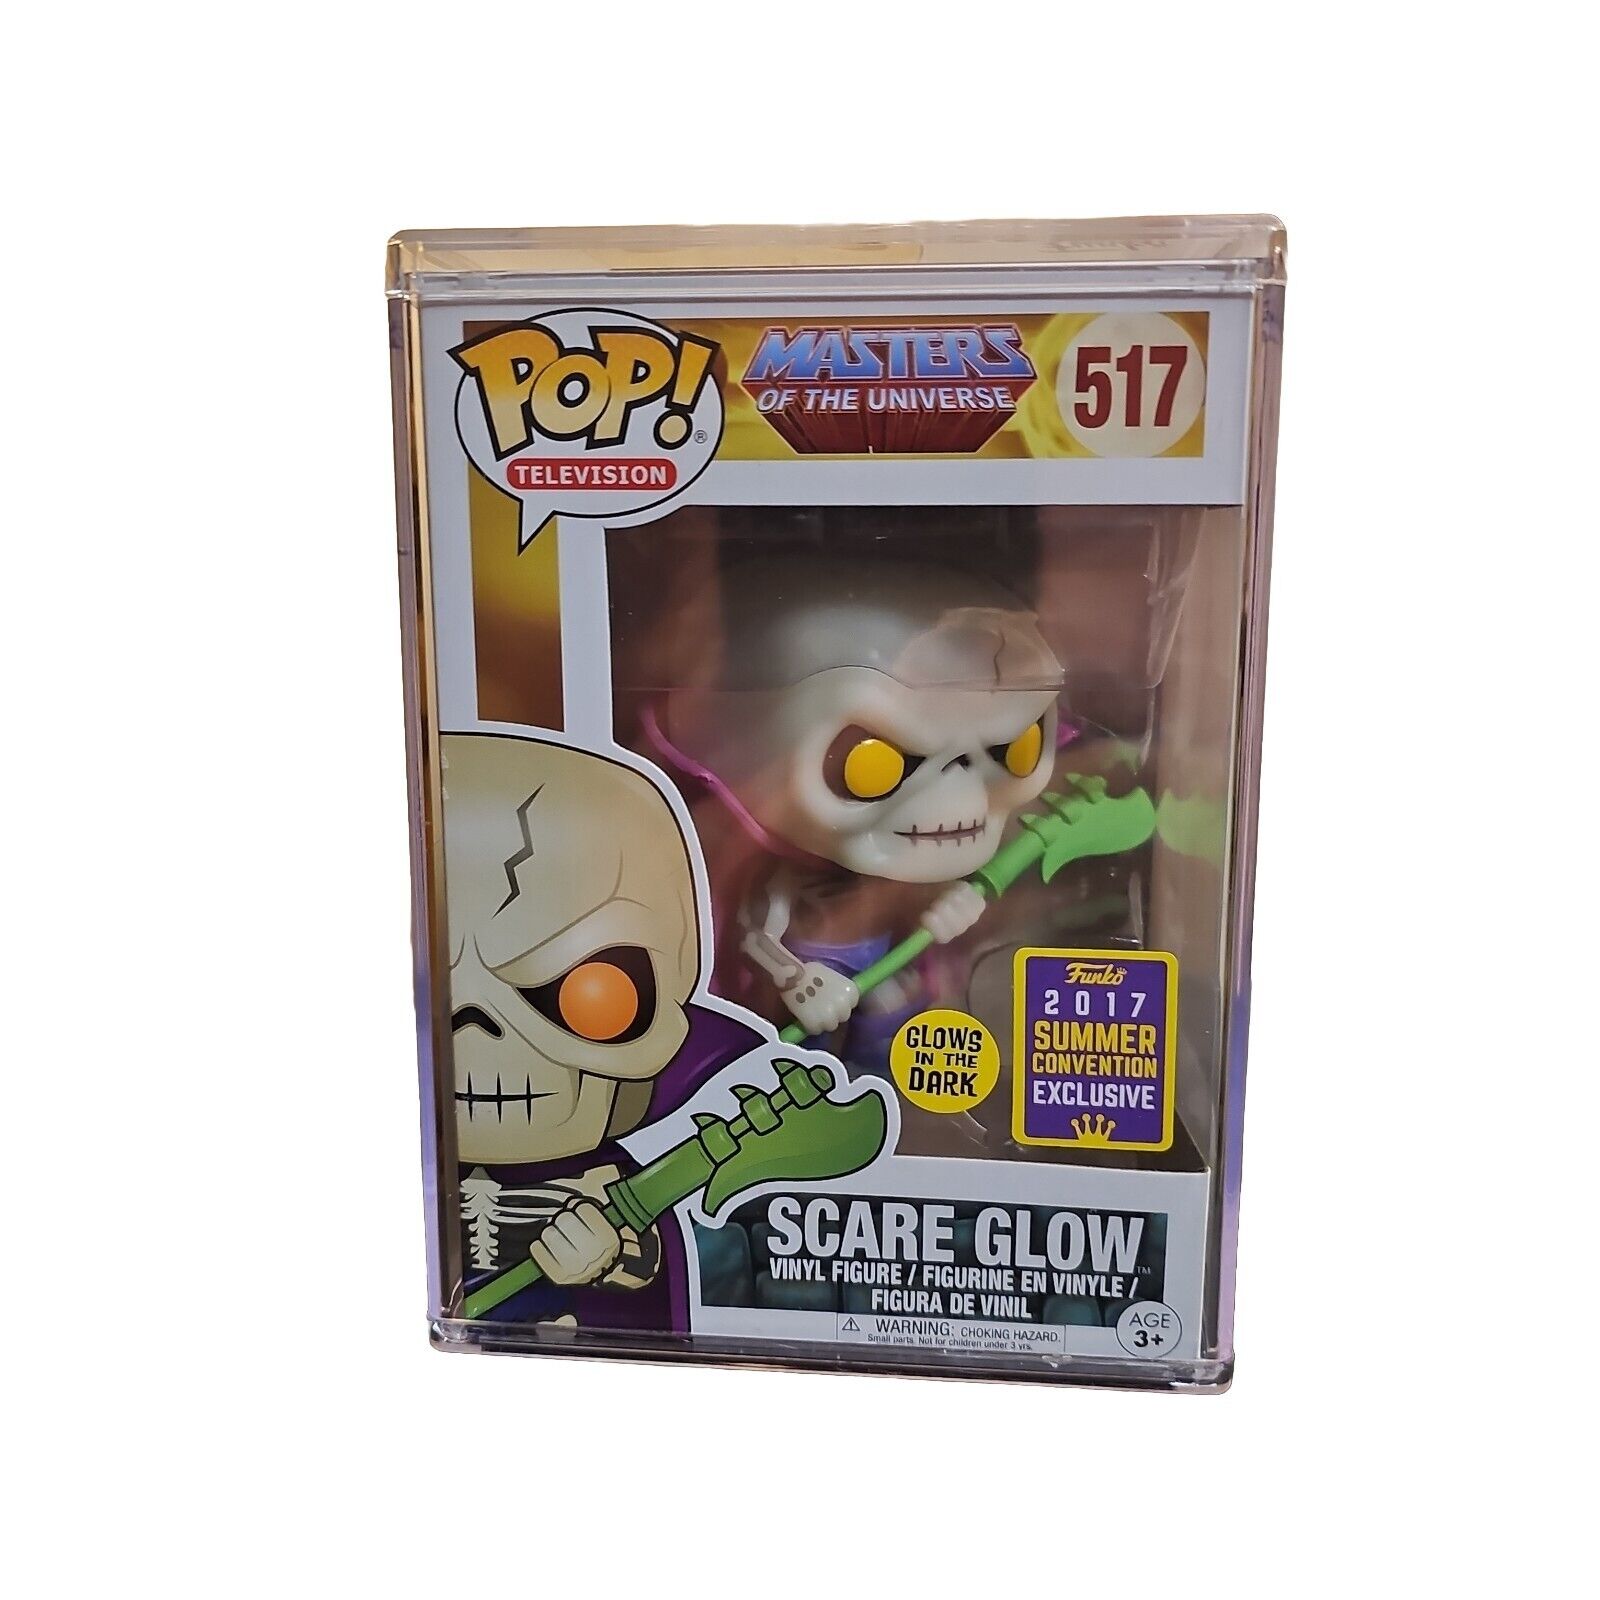 Funko Pop Vinyl: Masters of the Universe - Scare Glow - (Glow) - Barnes and...